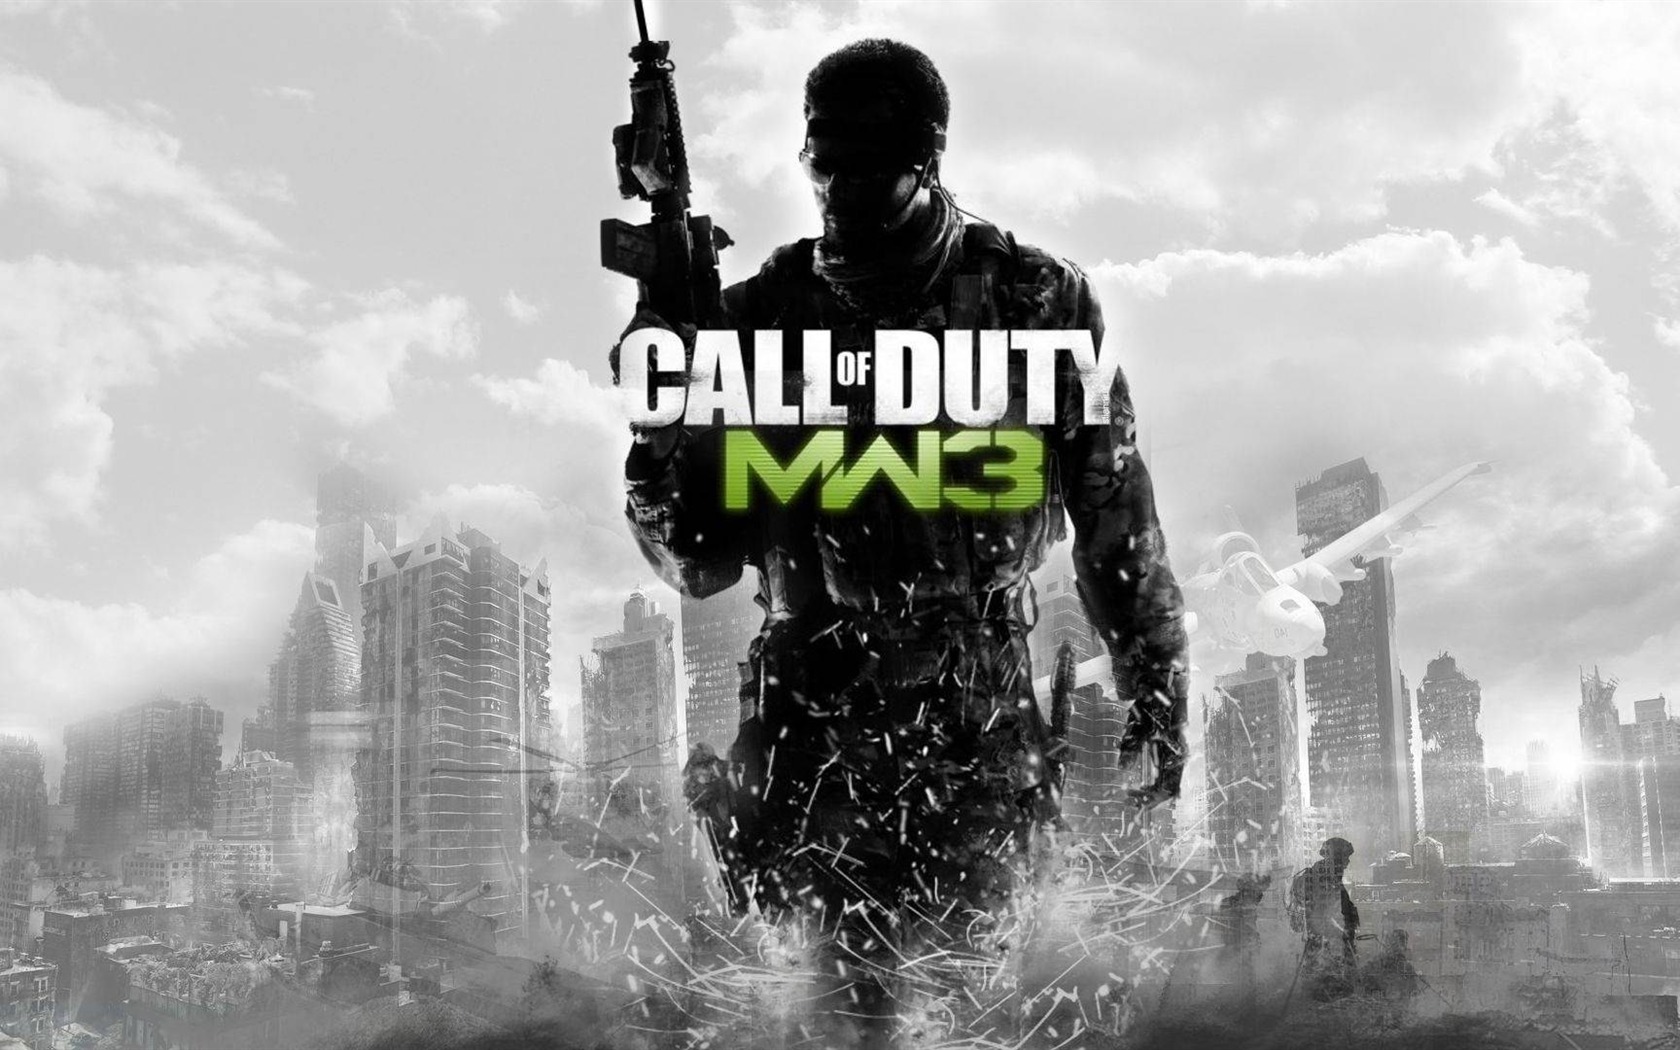 Call of Duty: MW3 HD wallpapers #1 - 1680x1050